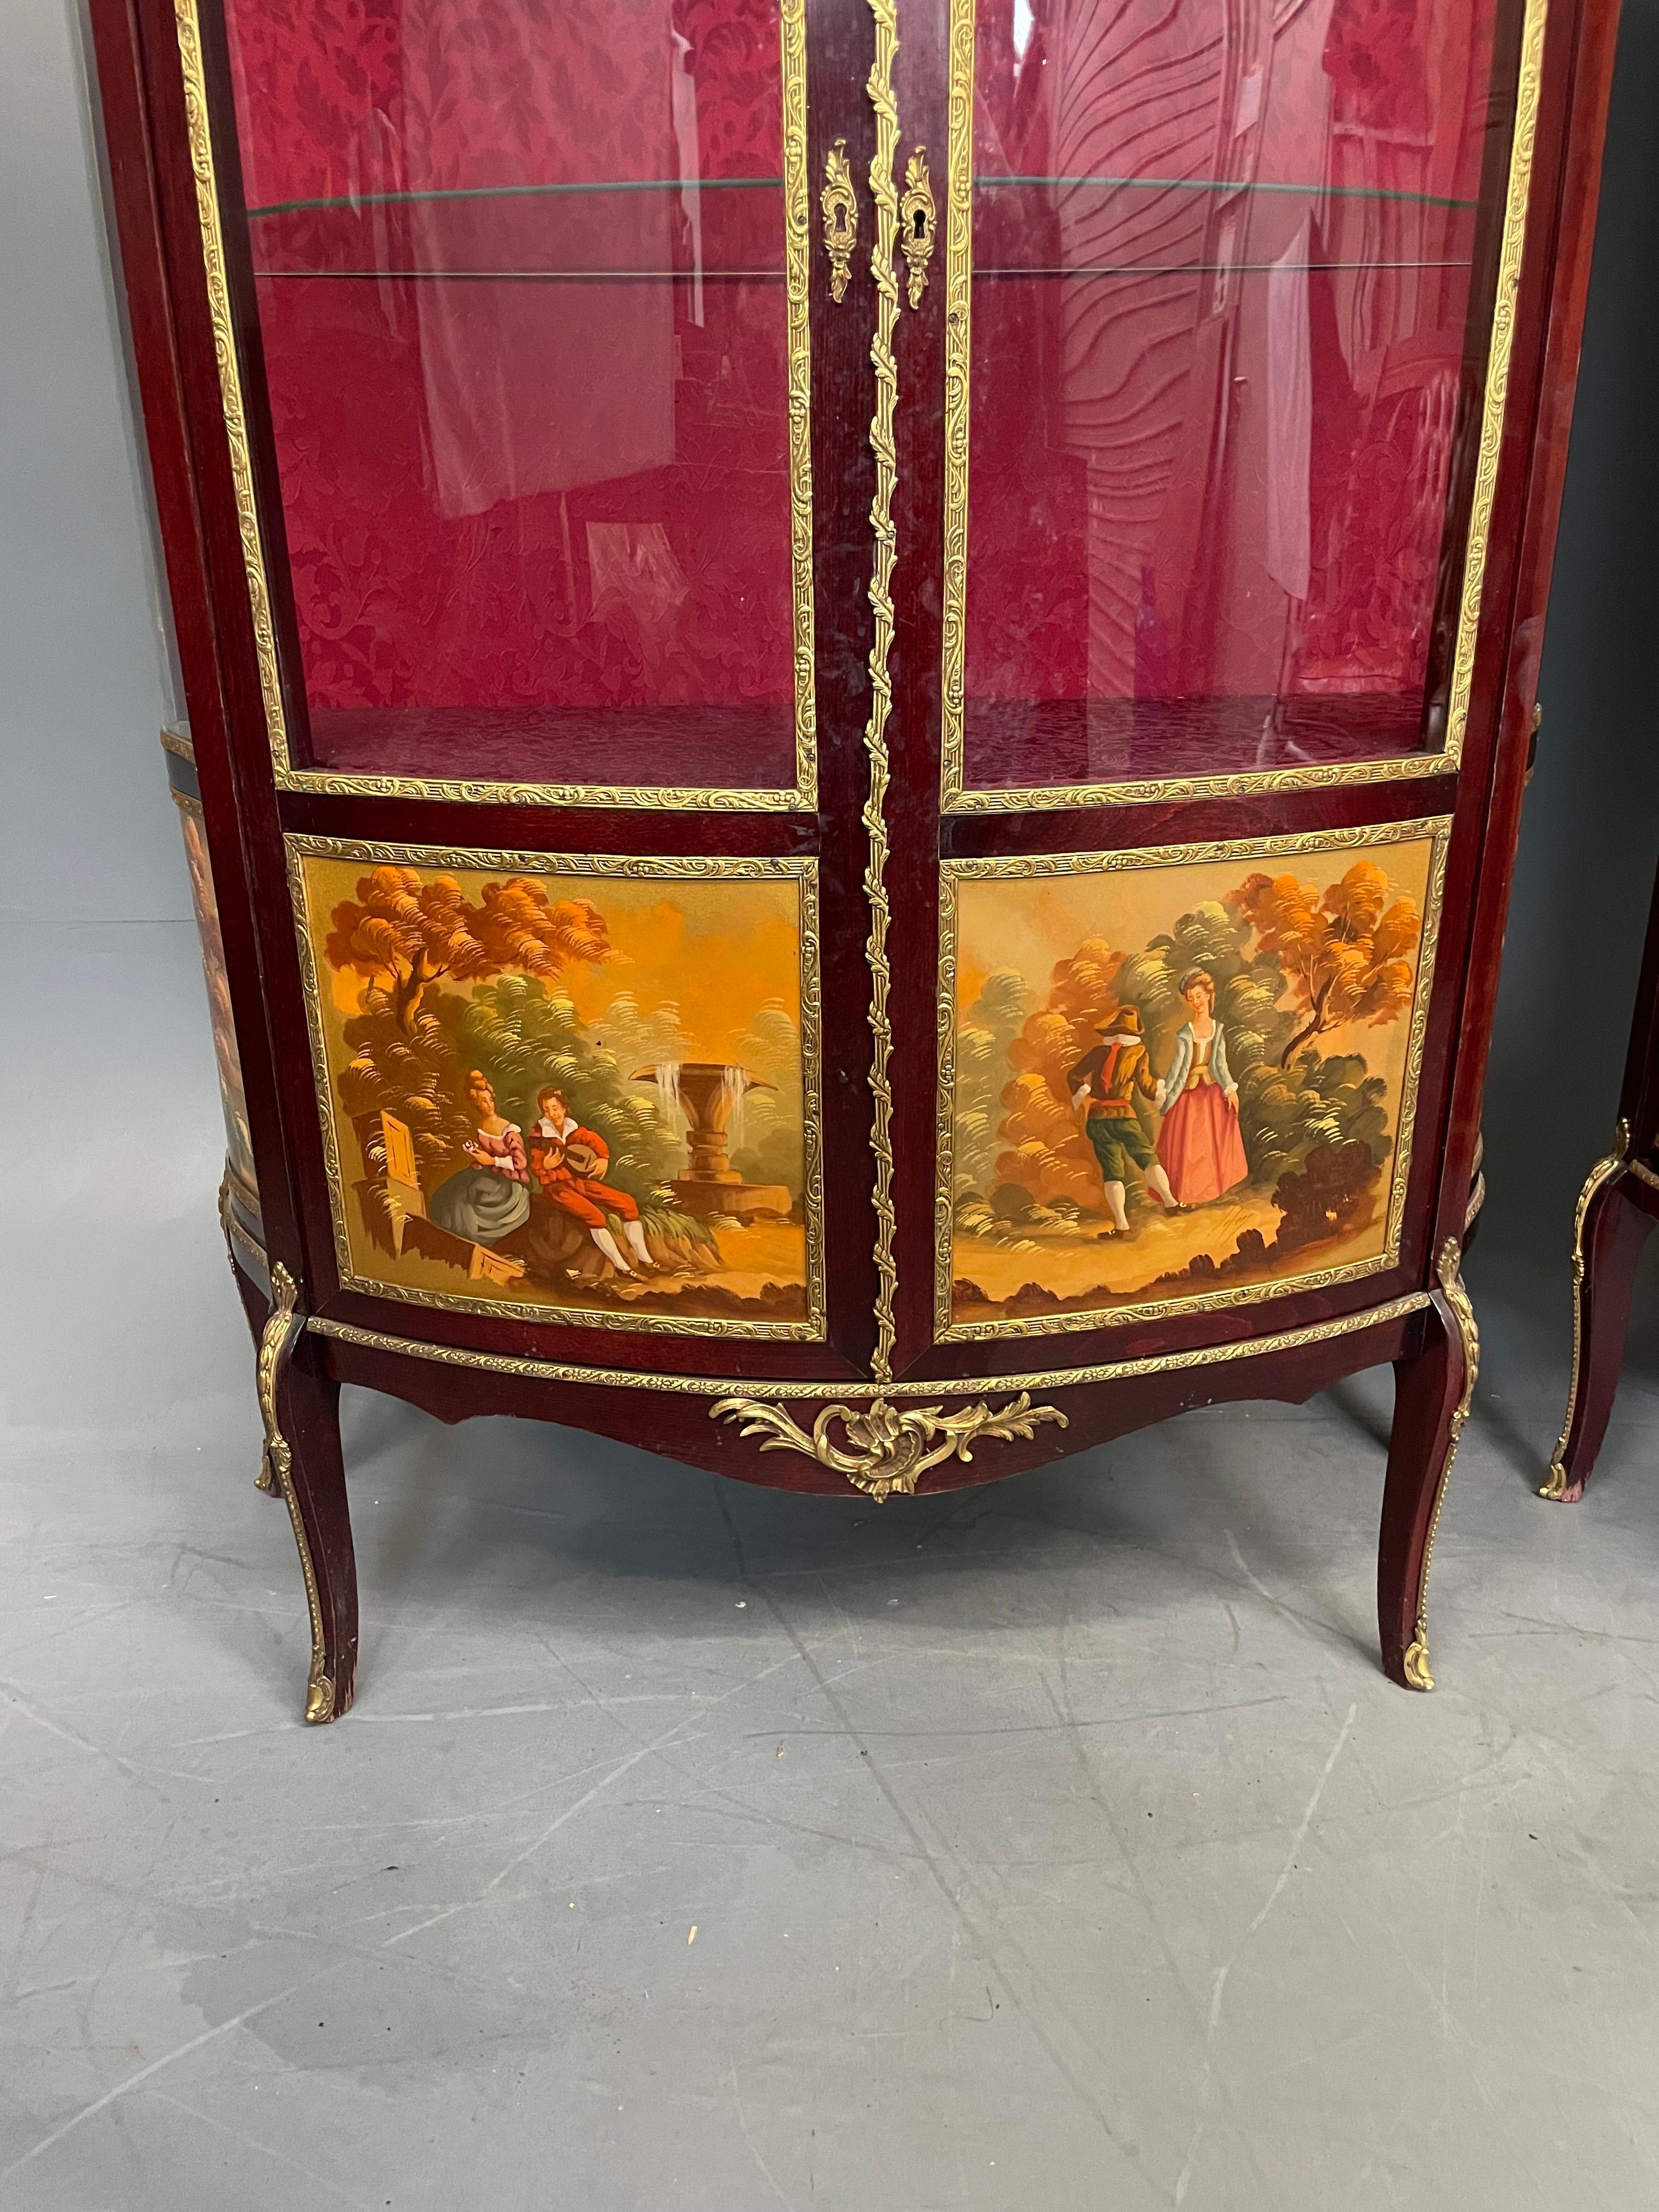 Rococo Revival Pair of French Vernis Martin Vitrines Display Cabinets